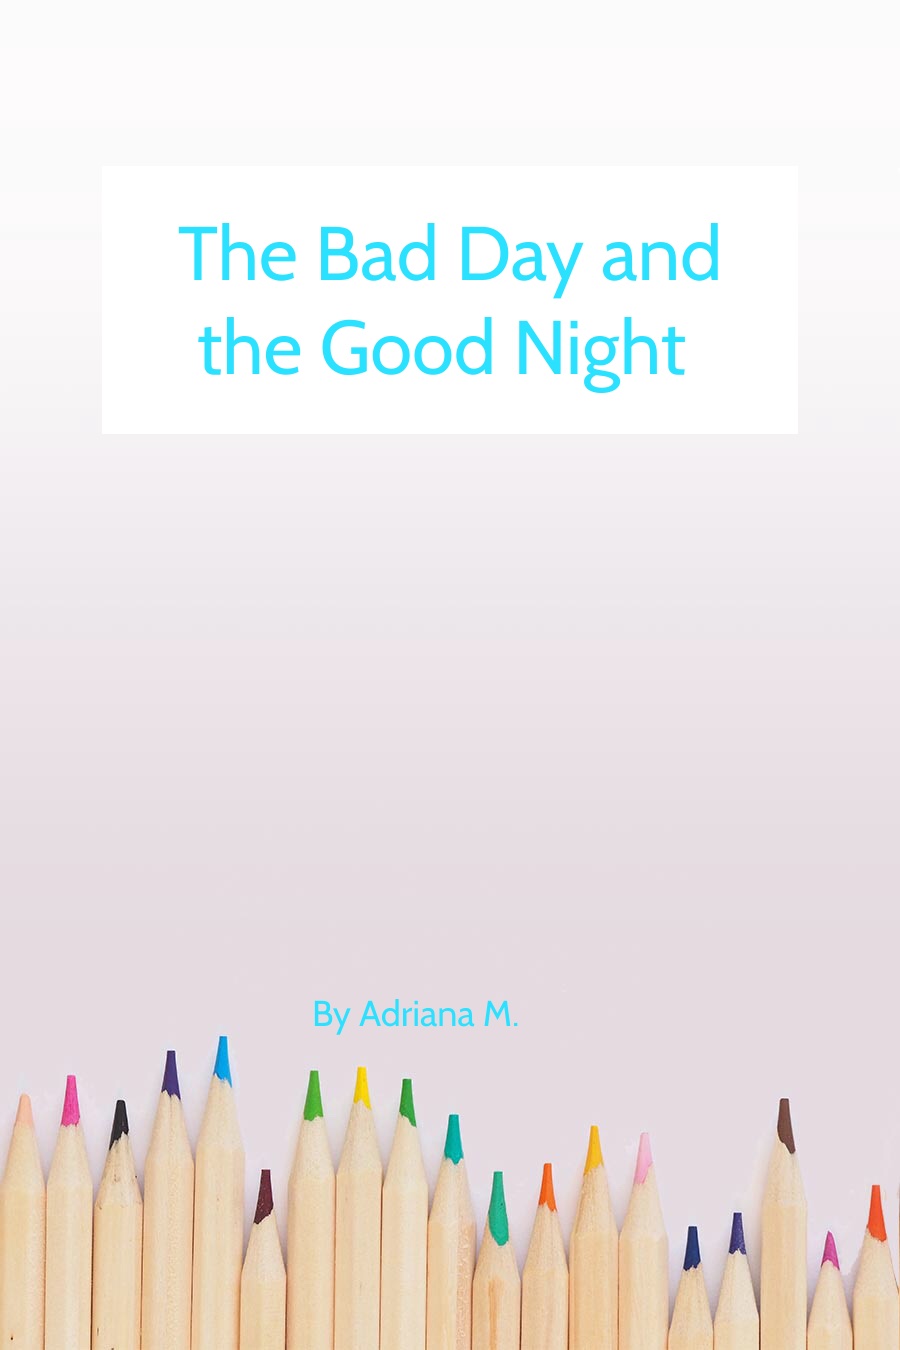 The Bad day and Good night